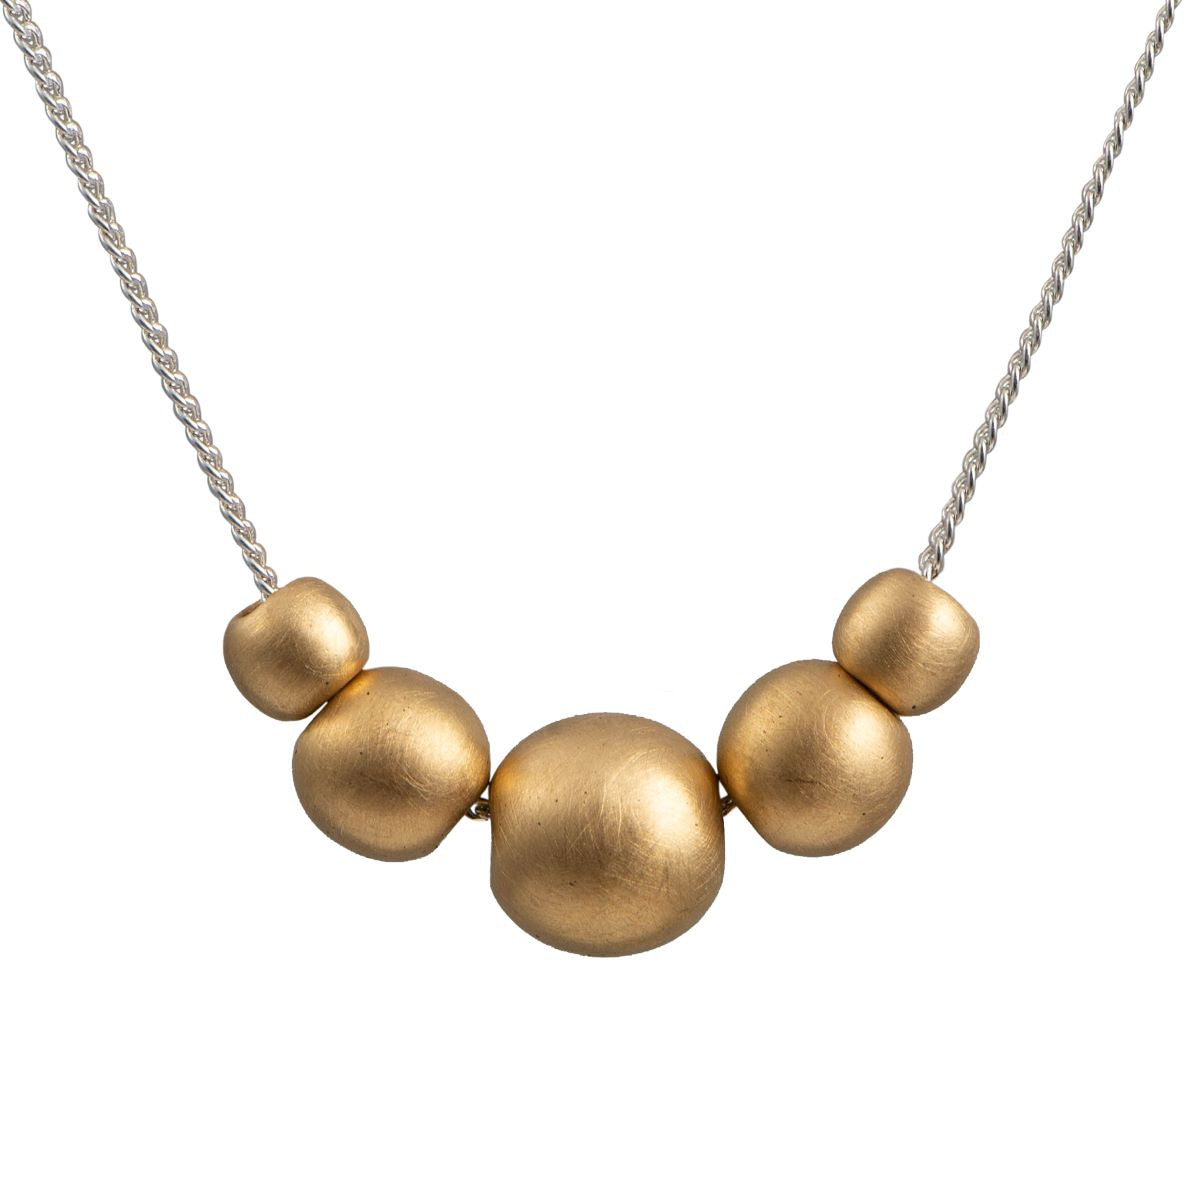 Brushed Gold Plated Sterling Silver Necklace with 5 Balls